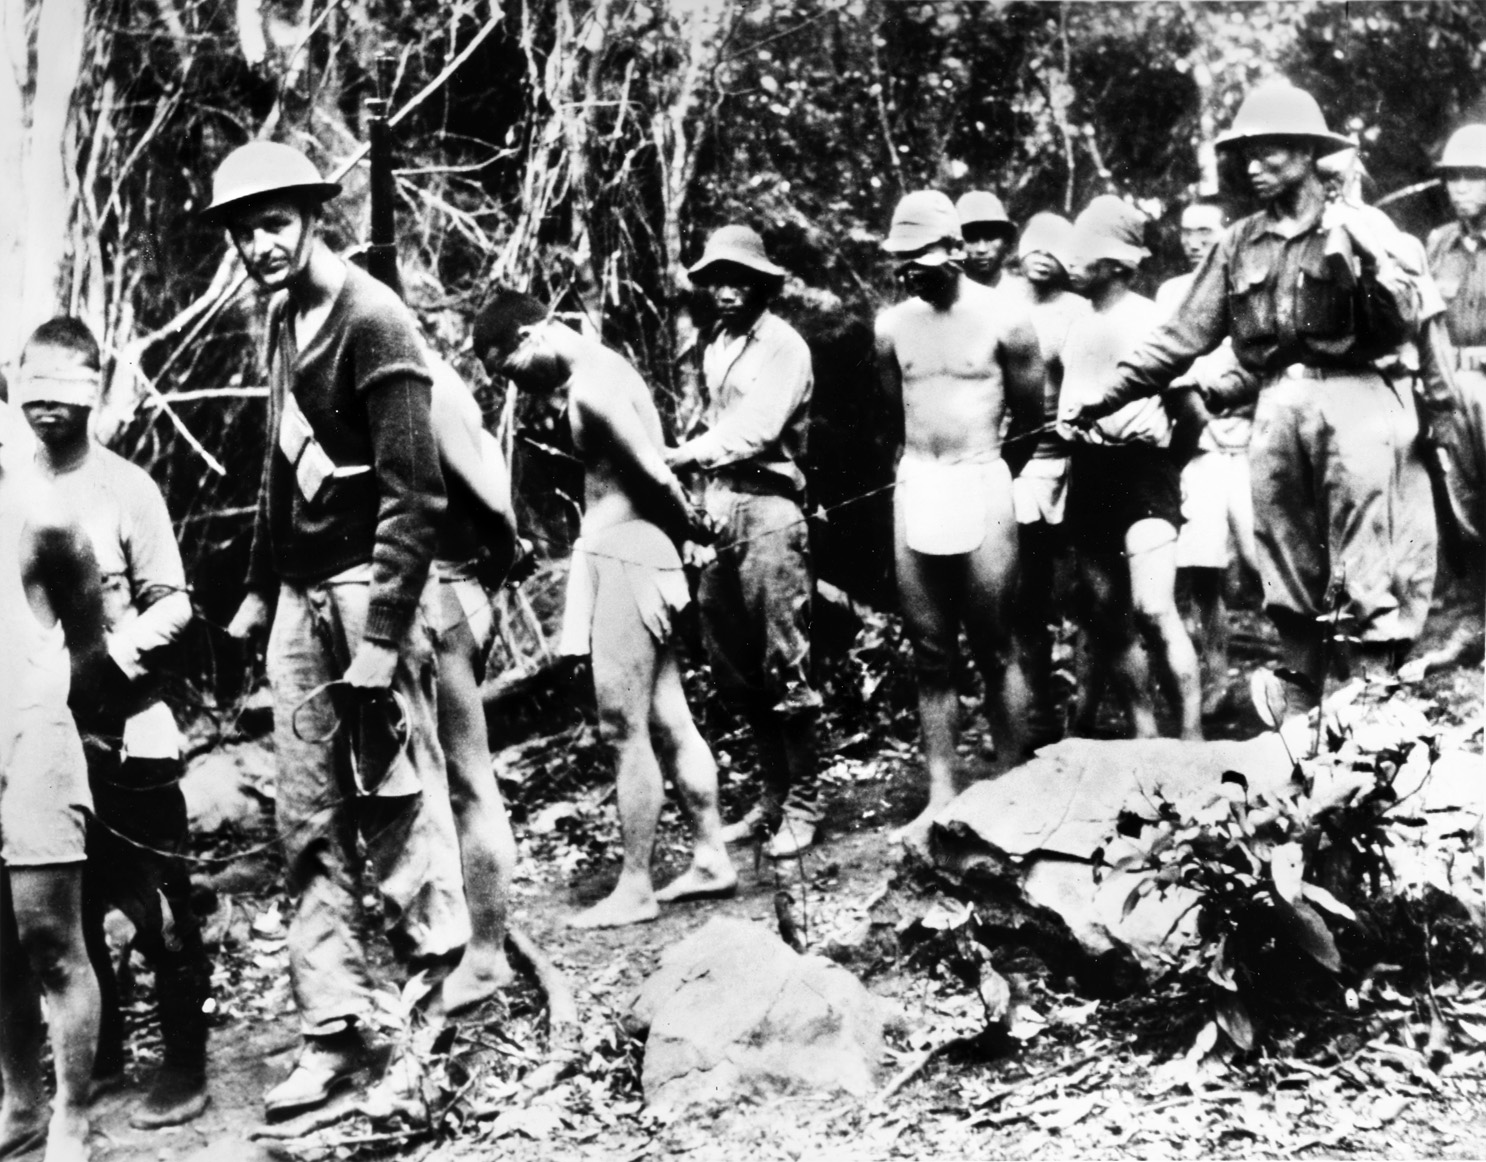 Blindfolded with their hands bound behind their backs, Japanese soldiers captured while trying to infiltrate American lines by swimming along the western shore of the Bataan Peninsula are led by their captors to American headquarters for questioning.